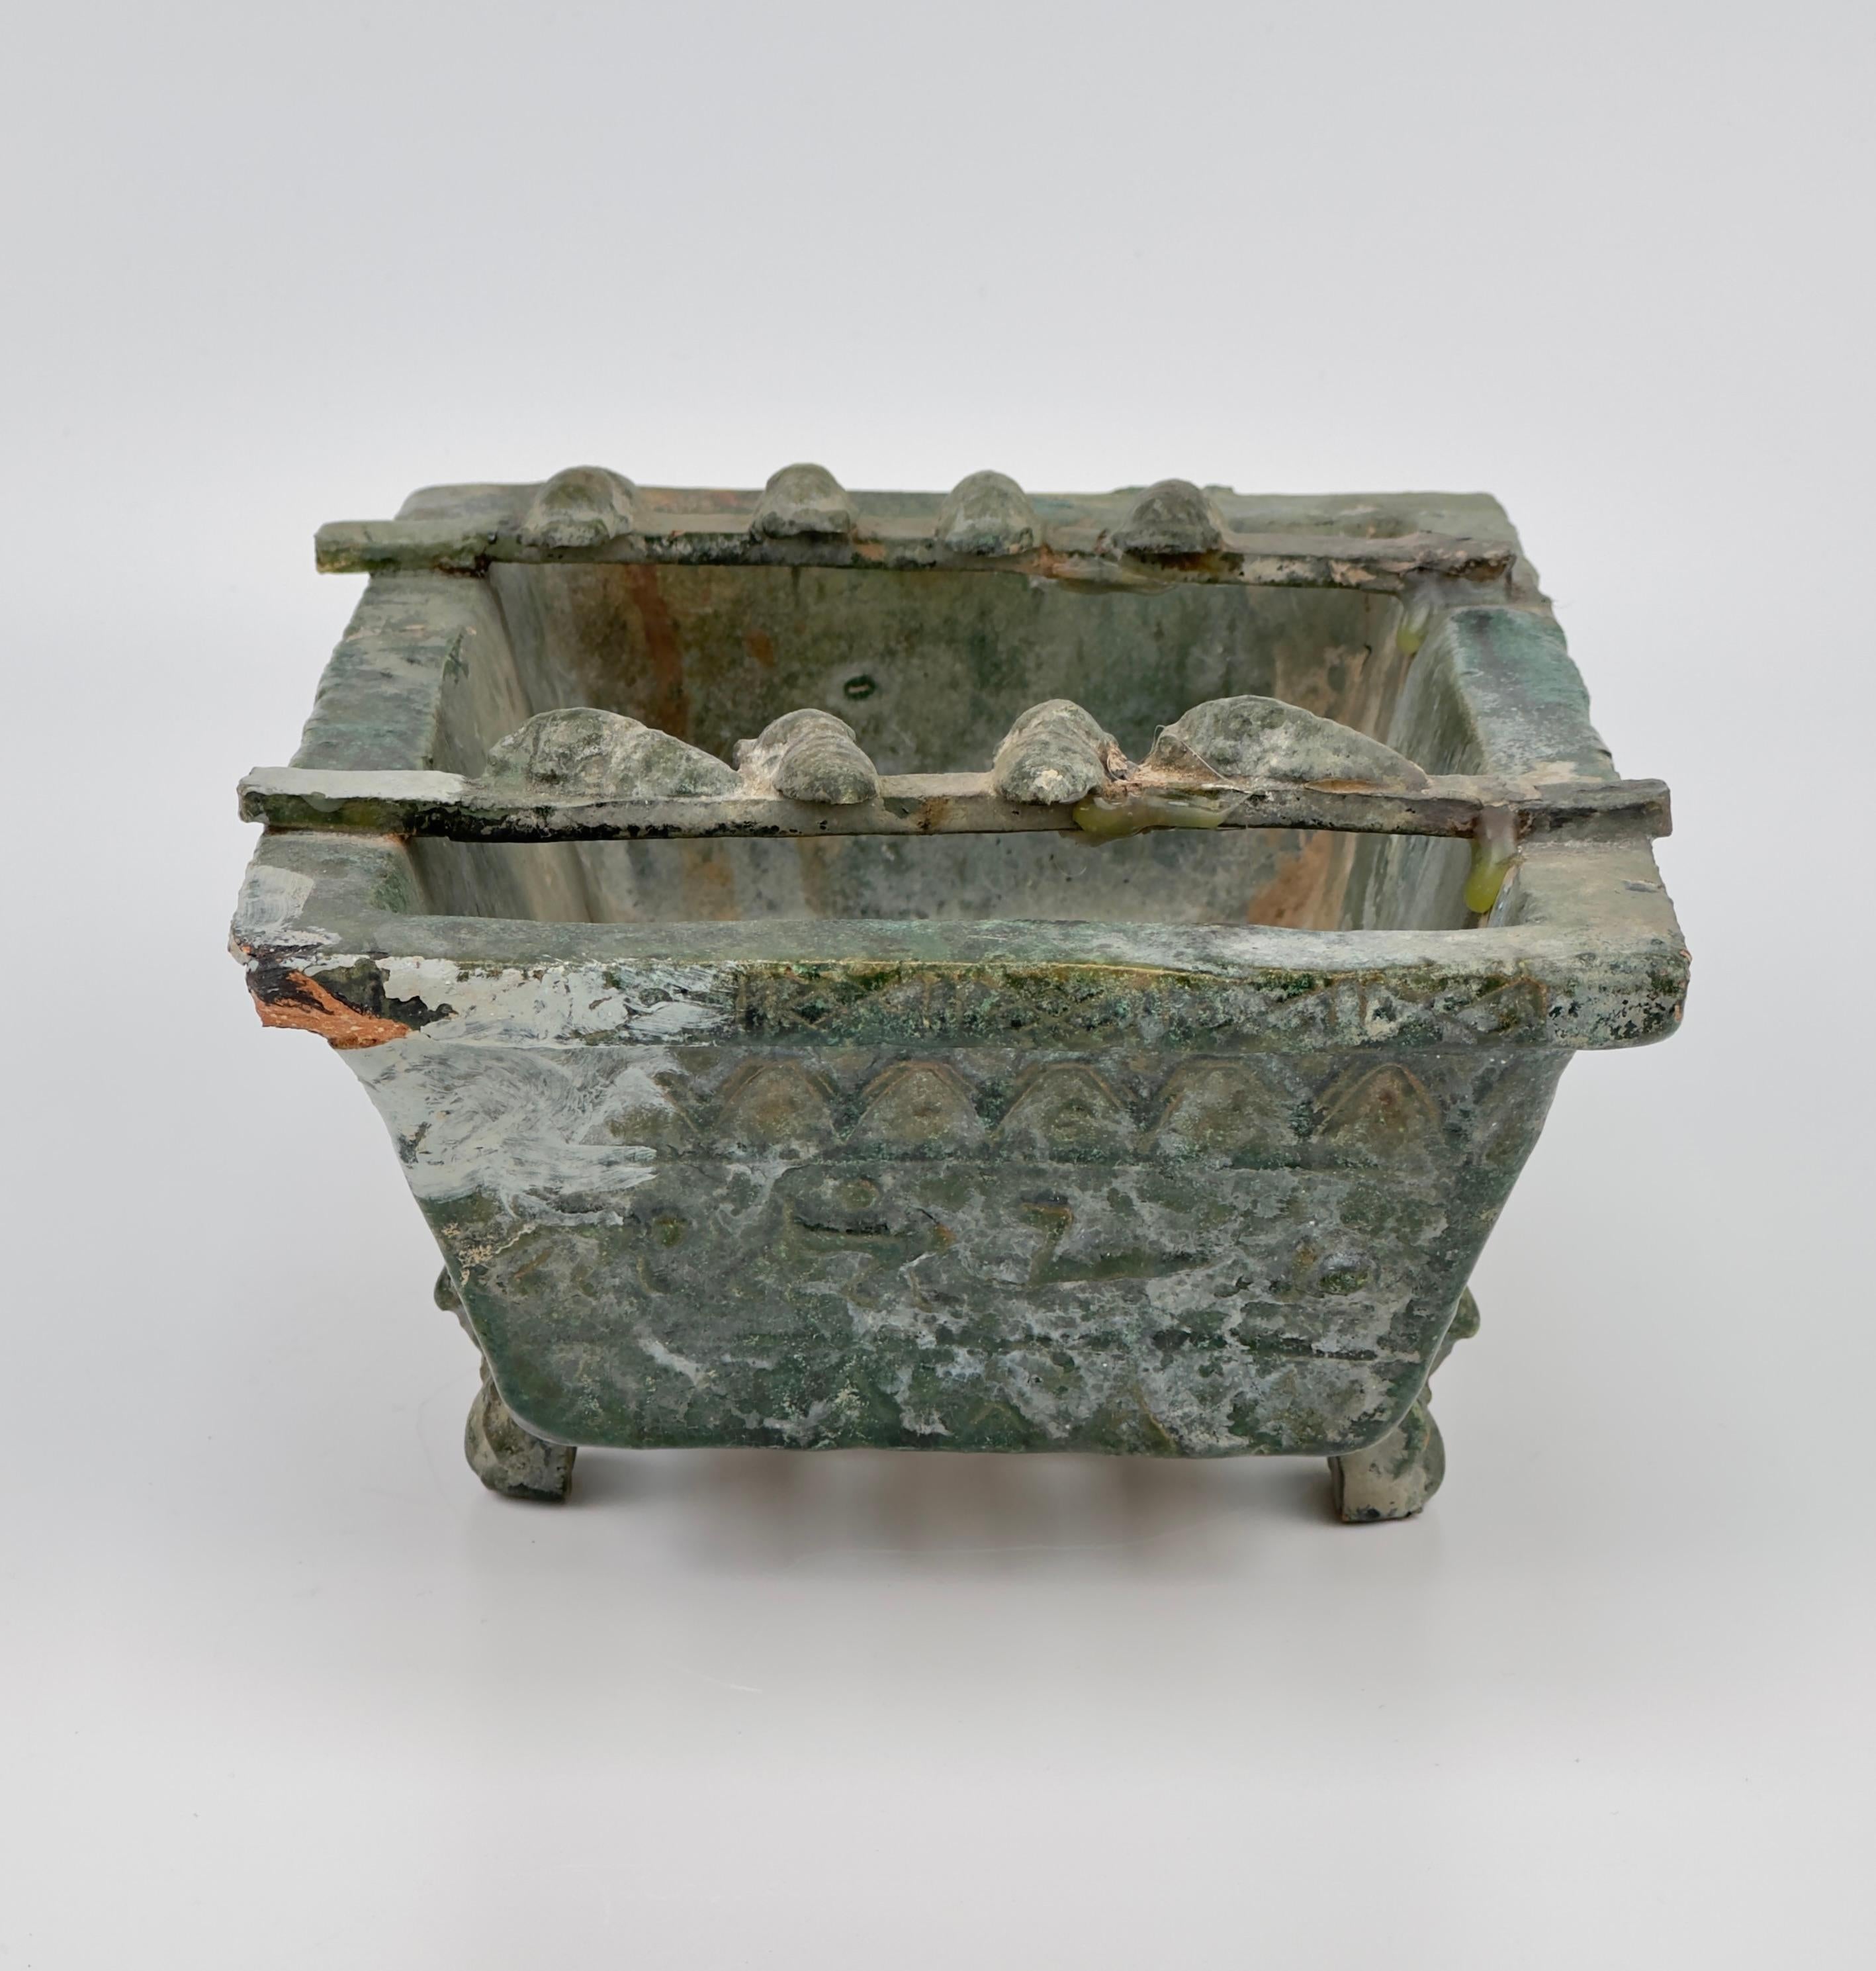 This pottery brazier, a burial artifact from the Han Dynasty, features quadrilateral sides that slope inward and a base with slits for ventilation. Each side is adorned with animal motifs and geometric patterns. The brazier stands on feet uniquely